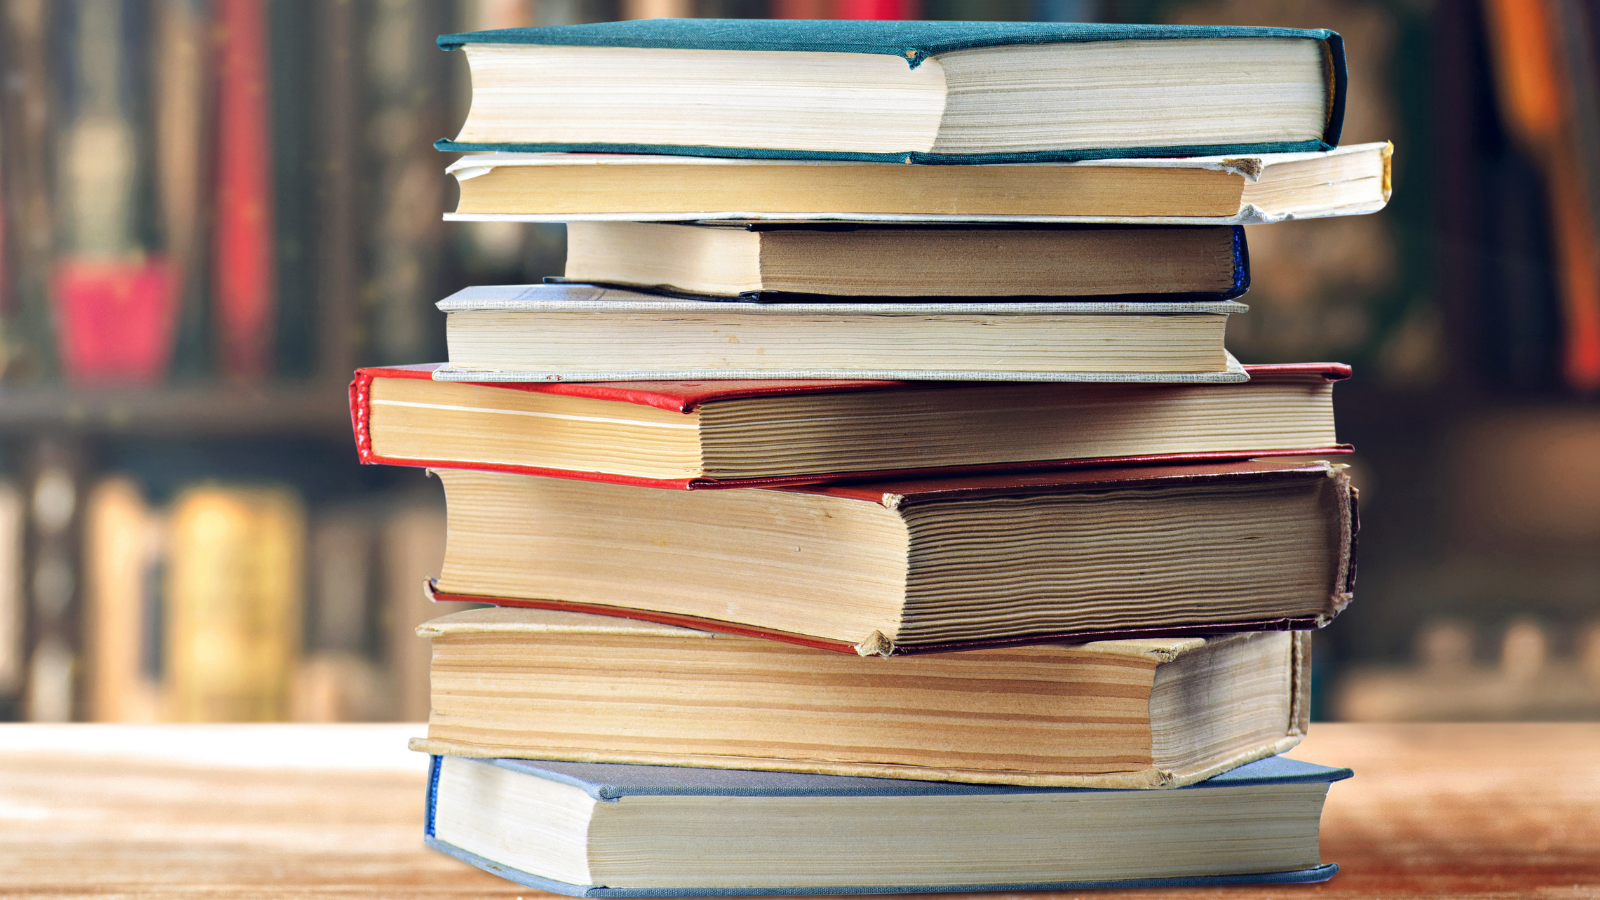 21 Books on Our Shelves for Personal and Professional Development